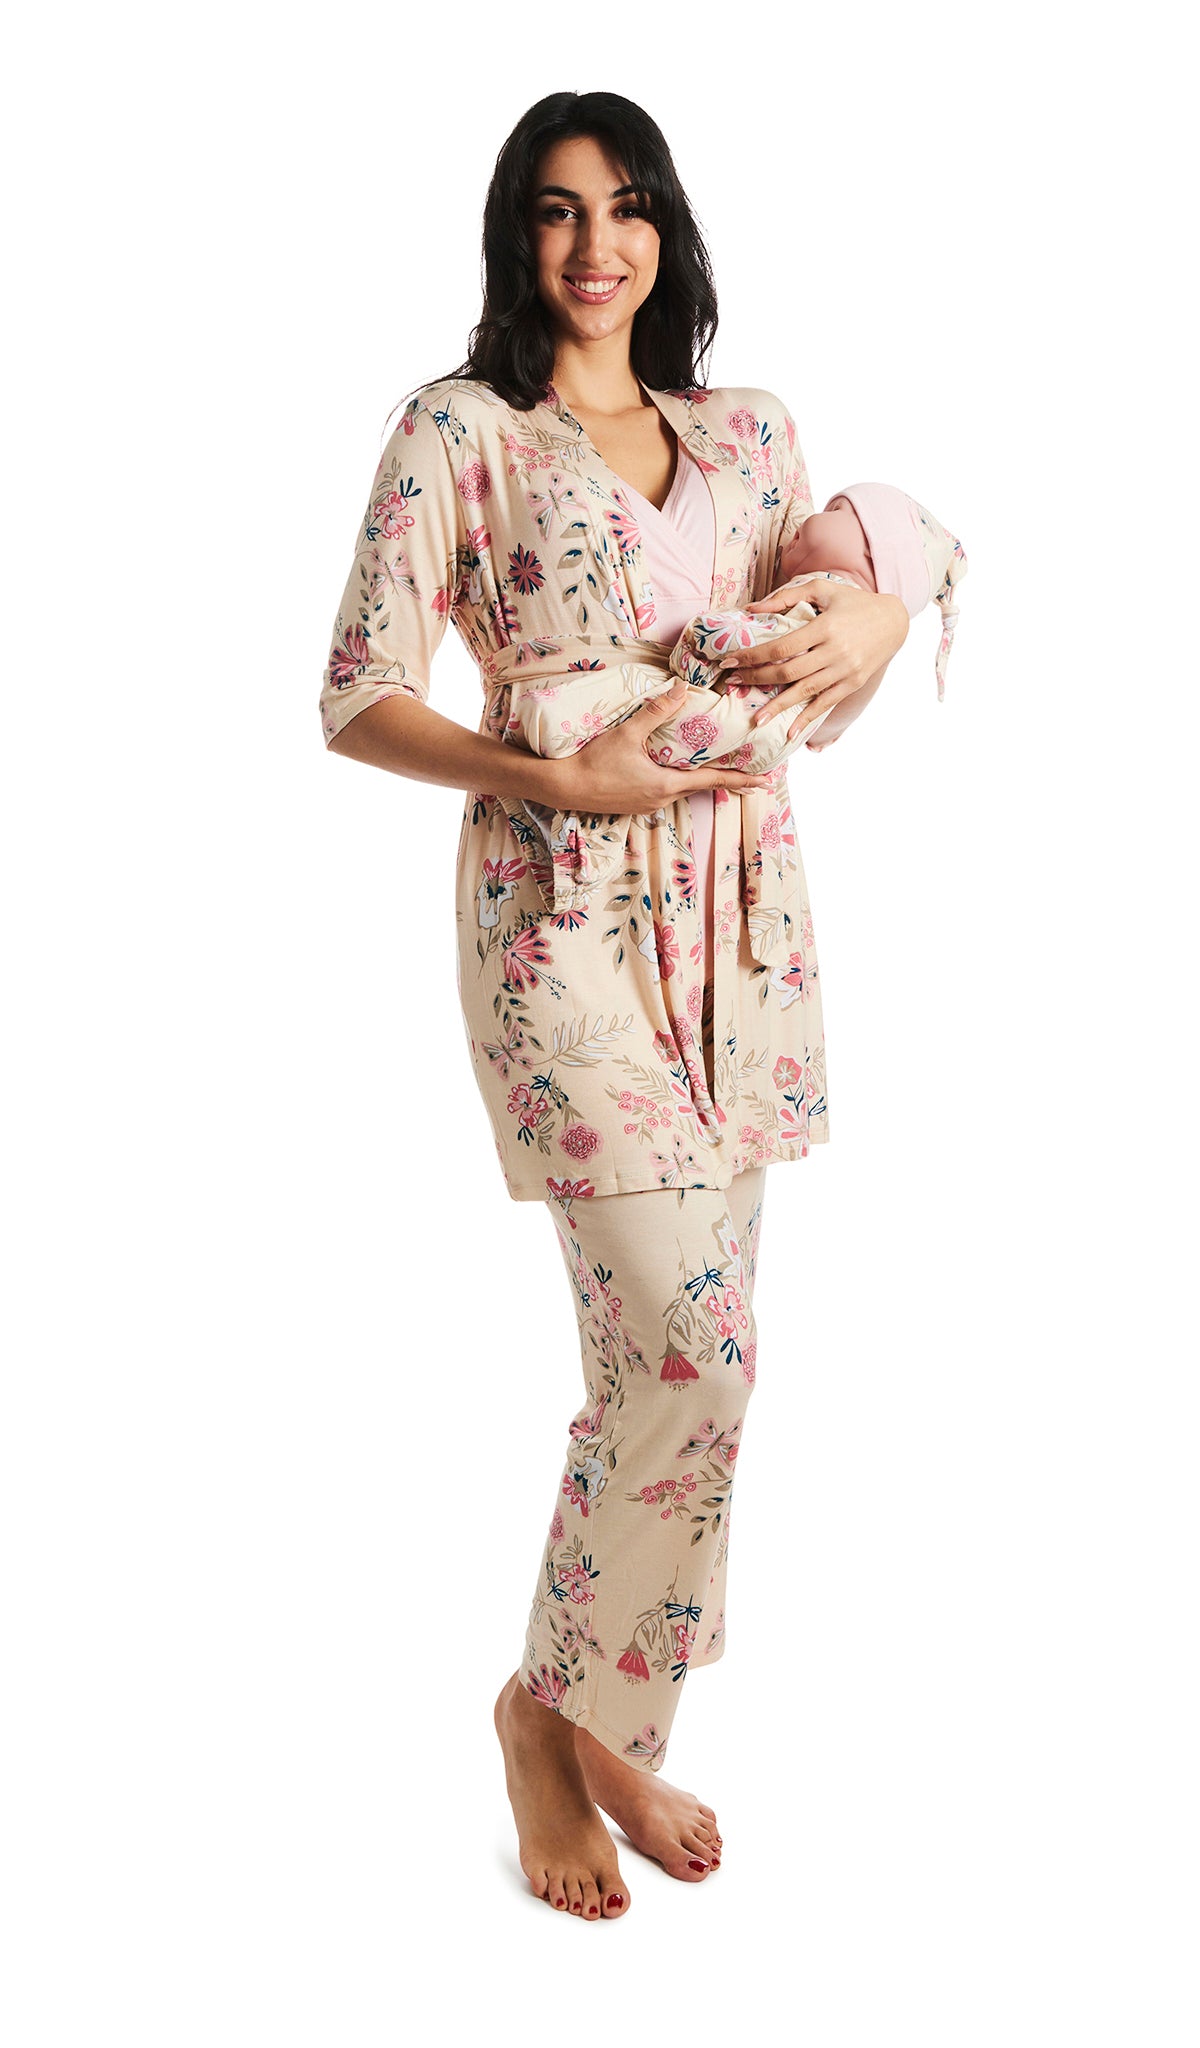 Wild Flower Analise 5-Piece Set. Woman wearing 3/4 sleeve robe, tank top and pant while holding a baby wearing baby gown and knotted baby hat.